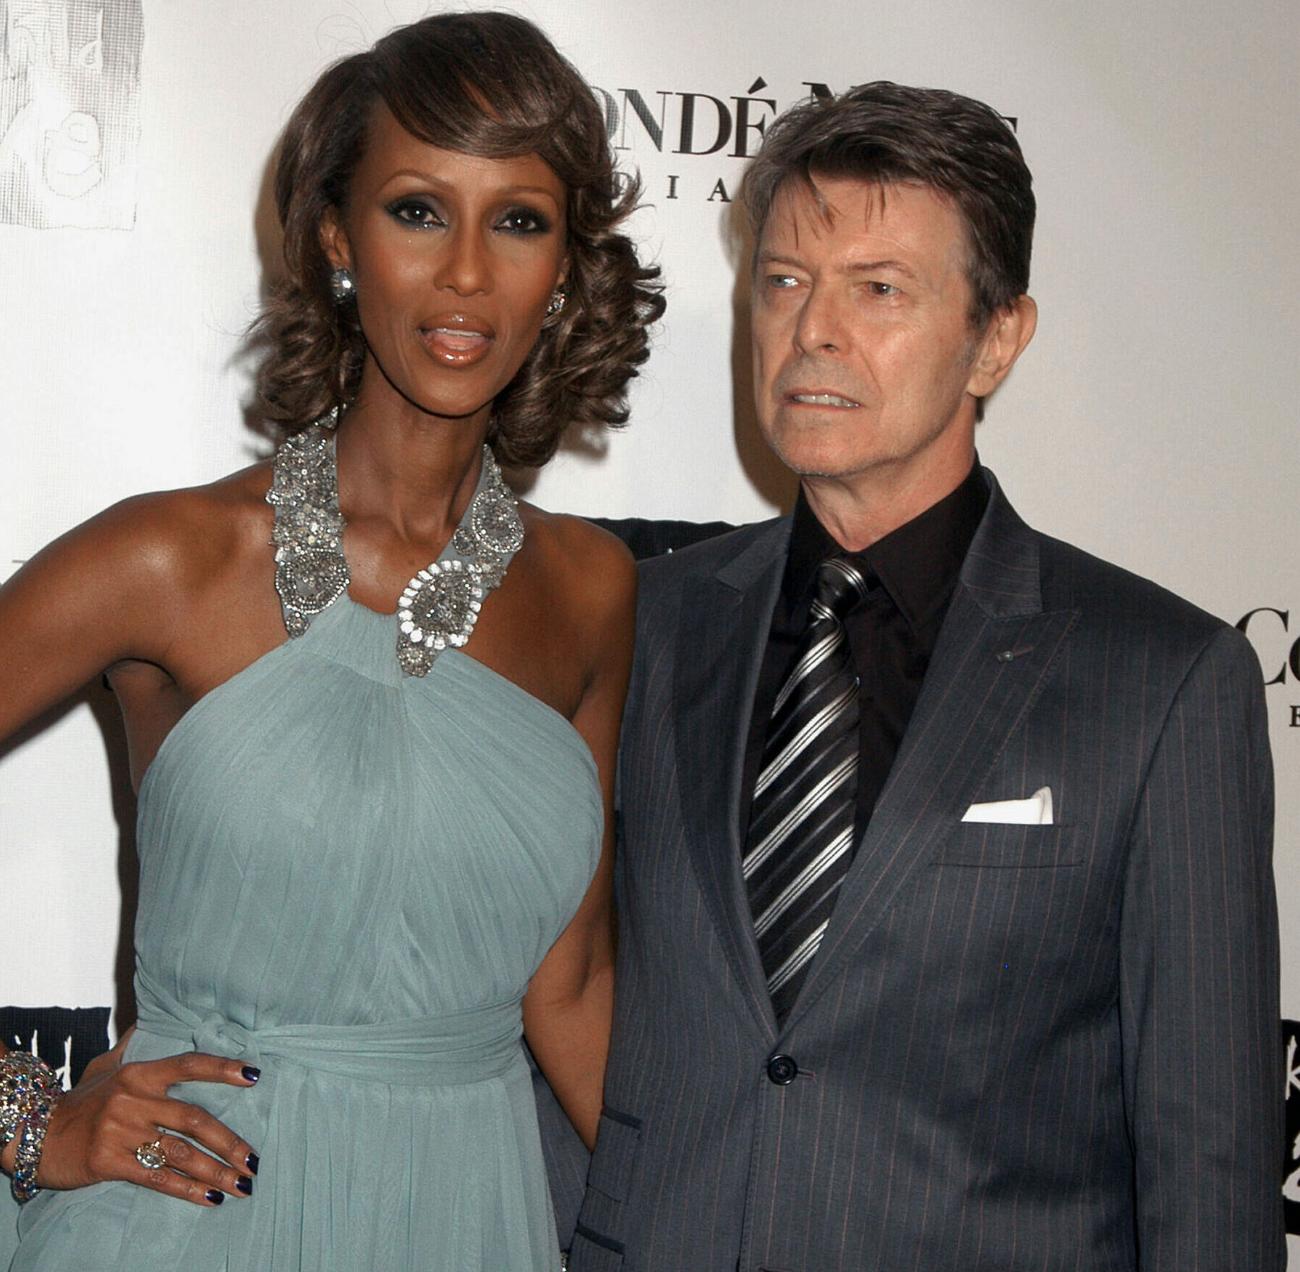 IMAN AND DAVID BOWIE AT THE FOURTH ANNUAL BLACK BALL CONCERT FOR KEEP A CHILD ALIVE, HELD AT HAMMERSTEIN BALLROOM, NEW YORK. 25 OCTOBER 2007.